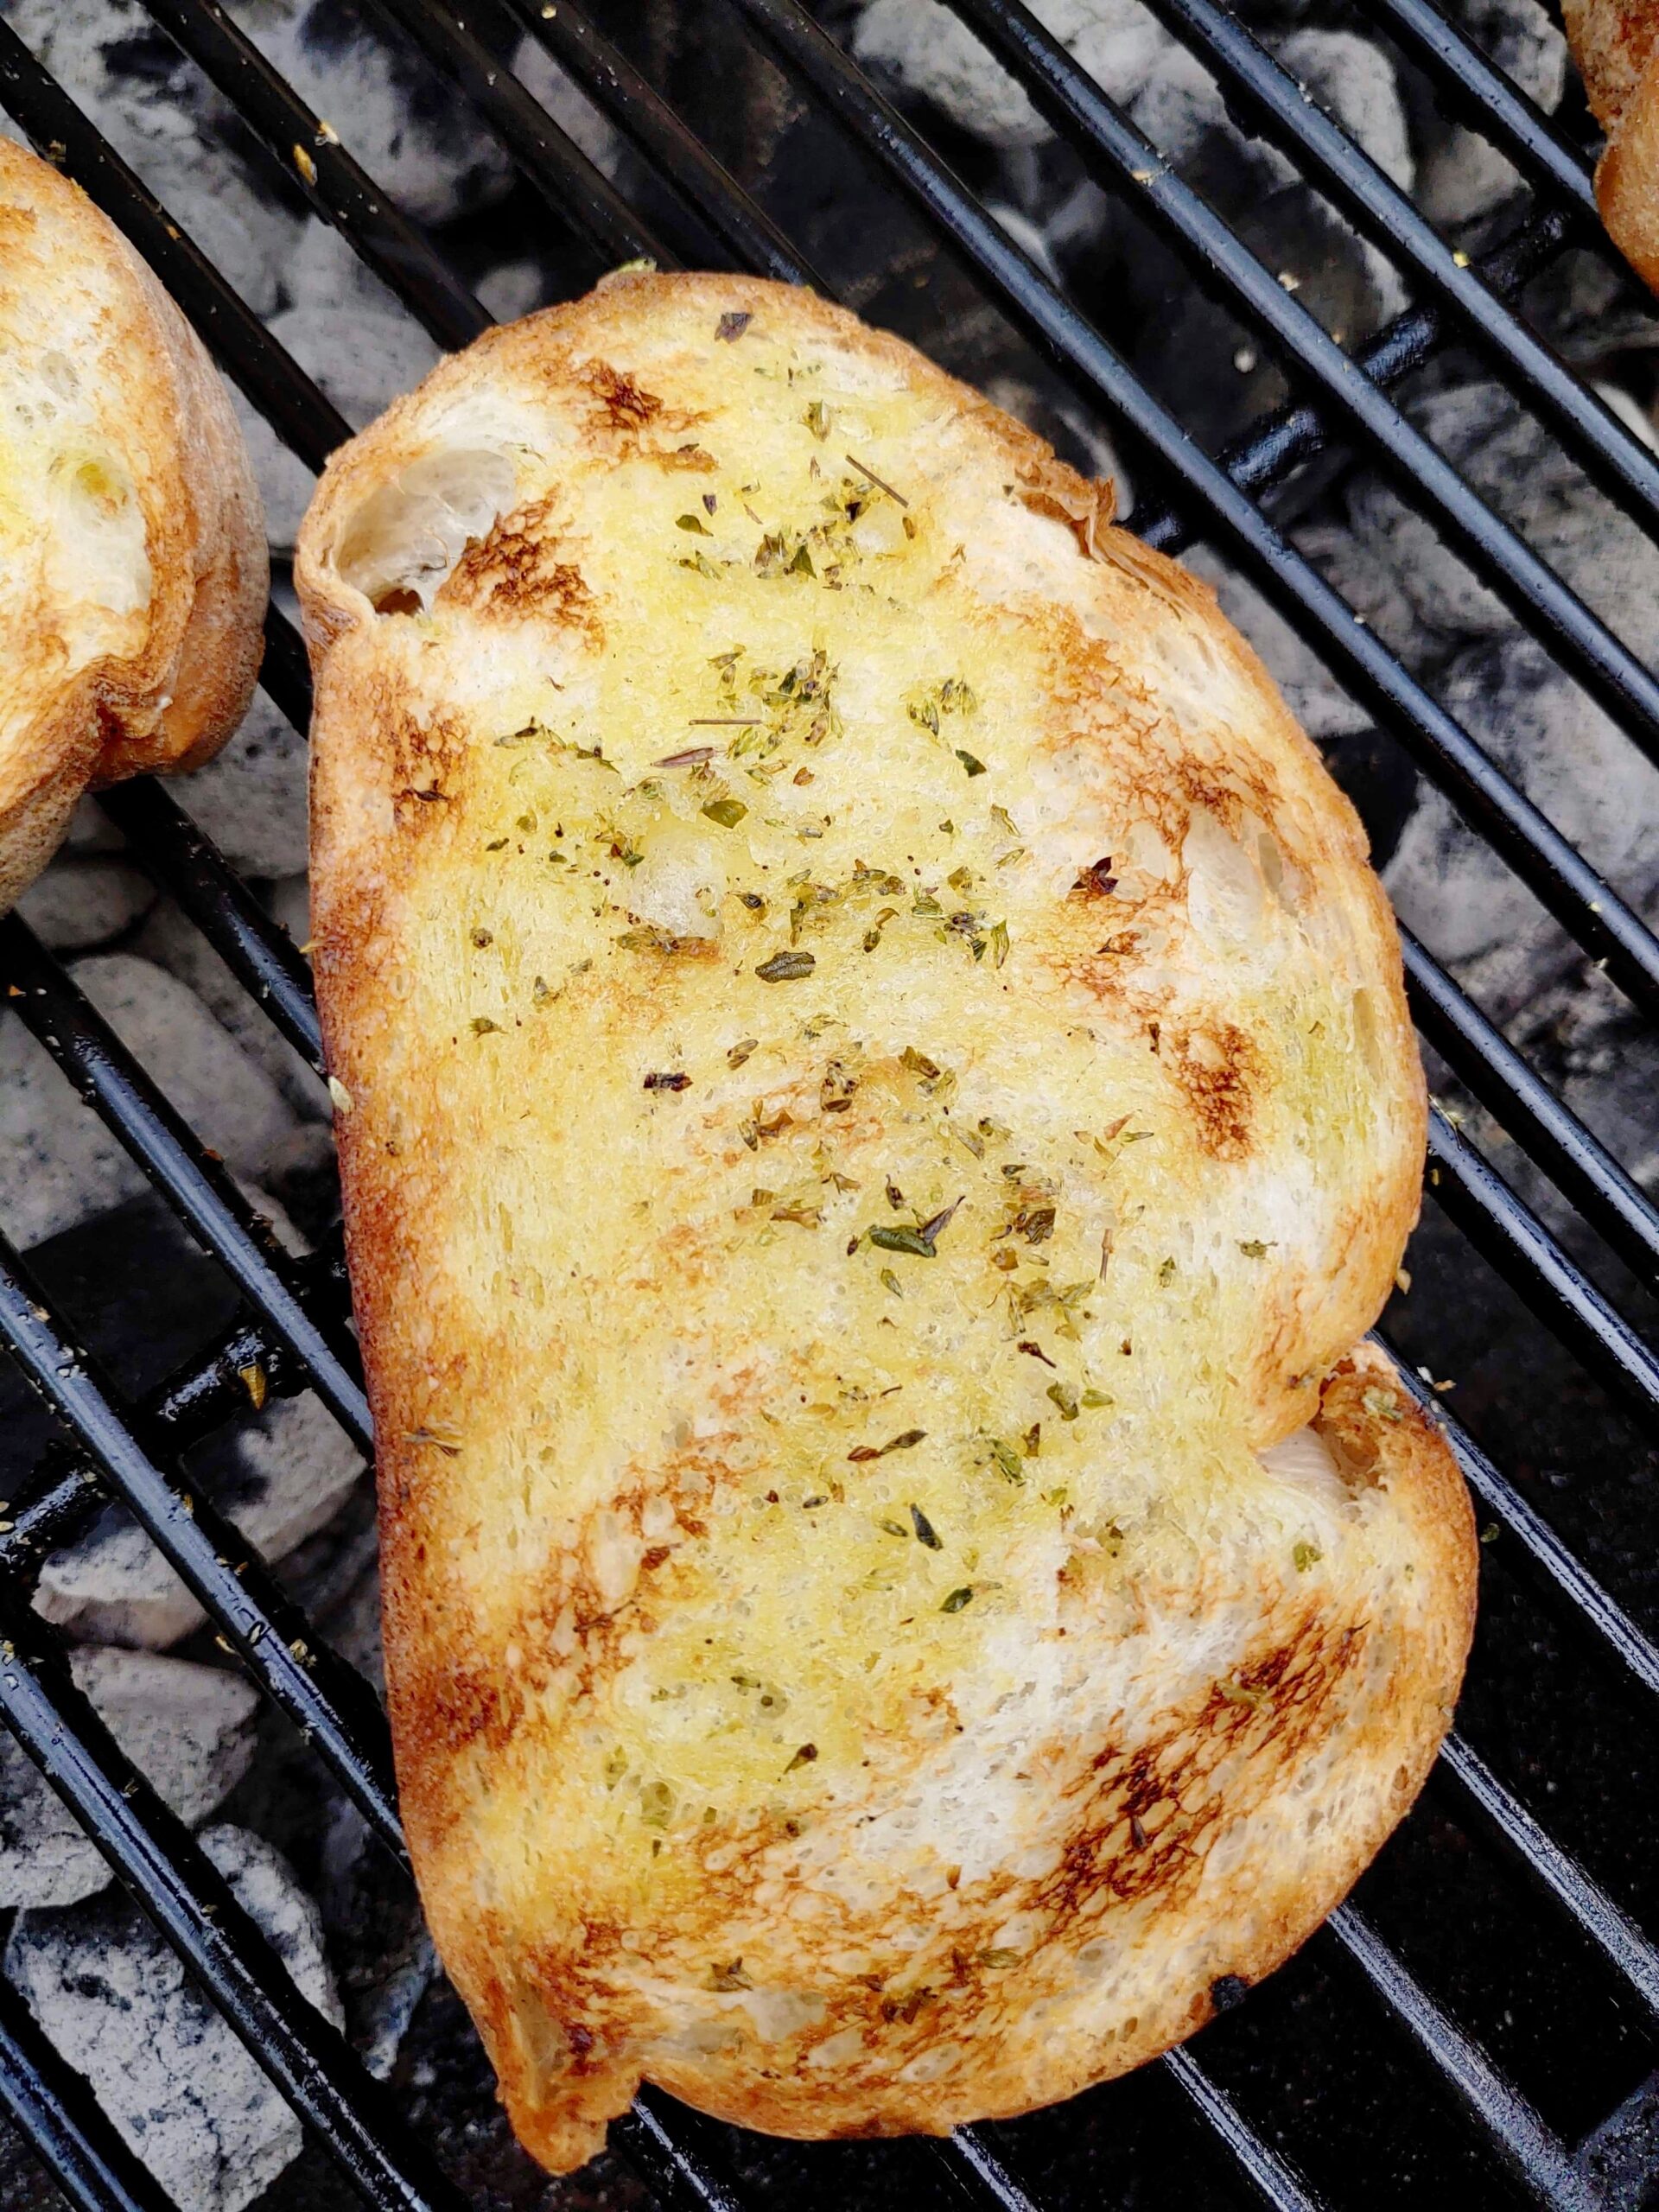 Grilled bread with olive oil and oregano (Ψωμί στη σχάρα)